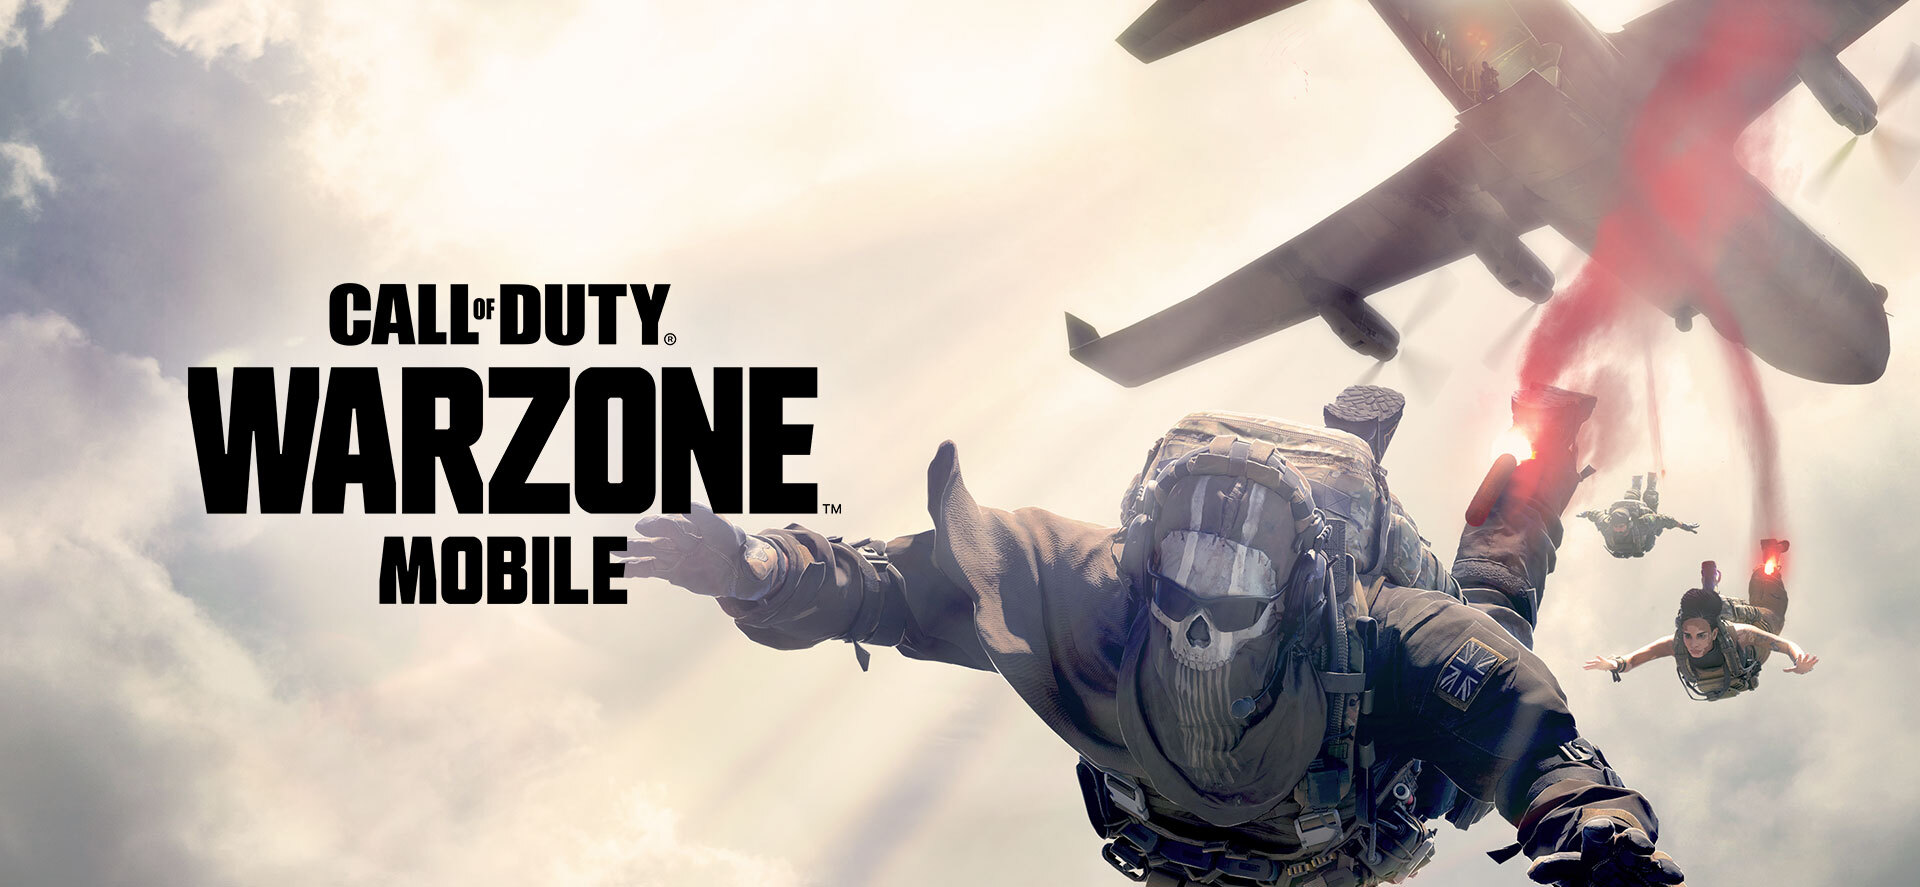 Call Of Duty: Warzone Mobile Is A Separate Game, Not A Port - GameSpot